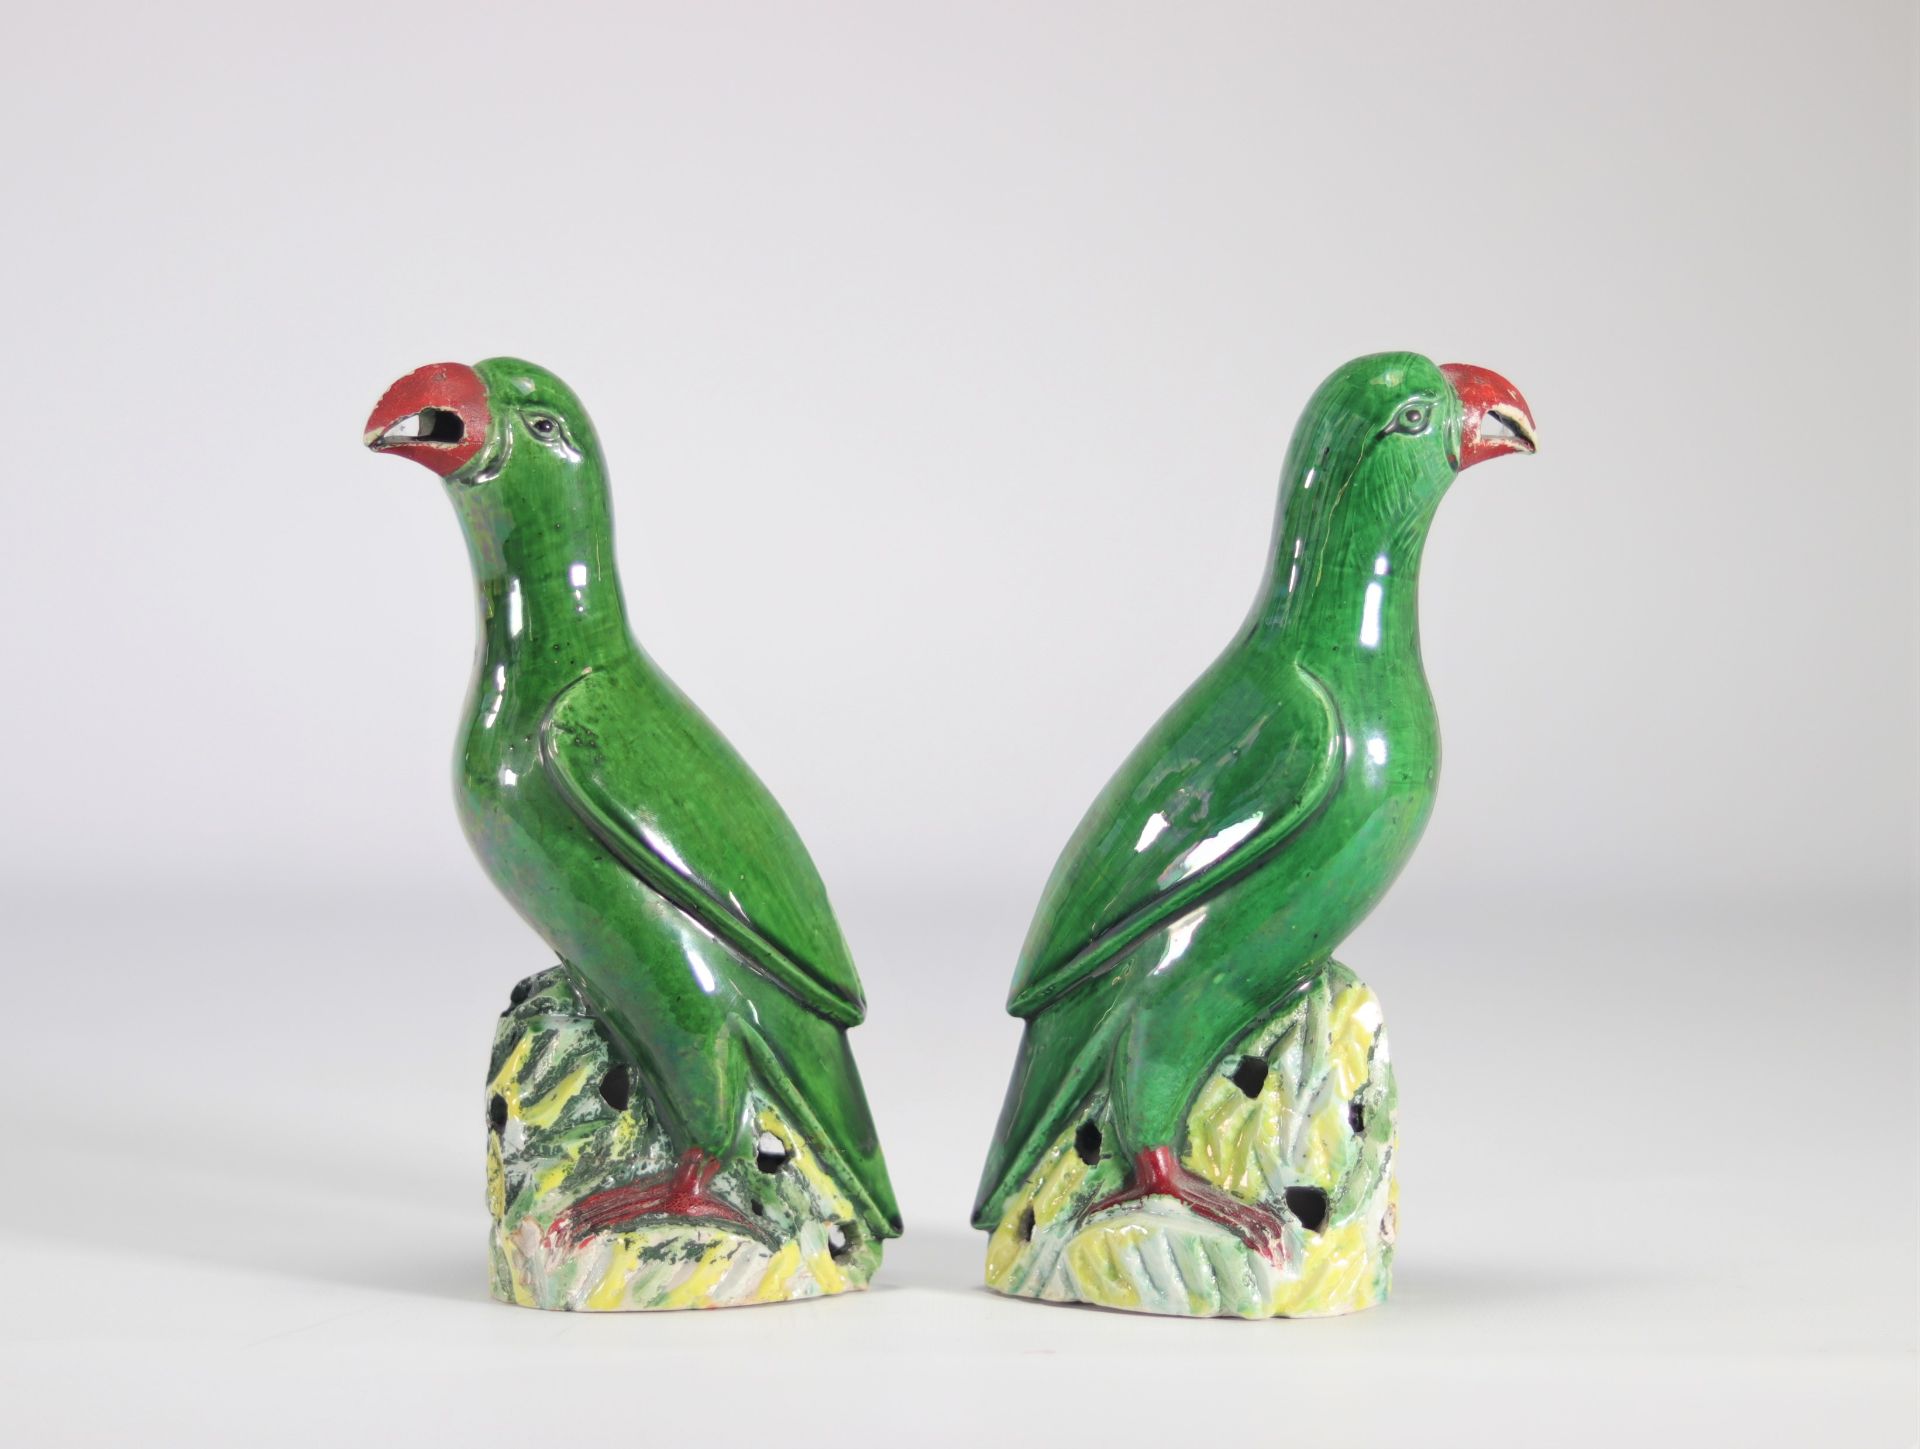 Pair of green glazed 'parrot' birds from China from the 19th century - Image 2 of 4